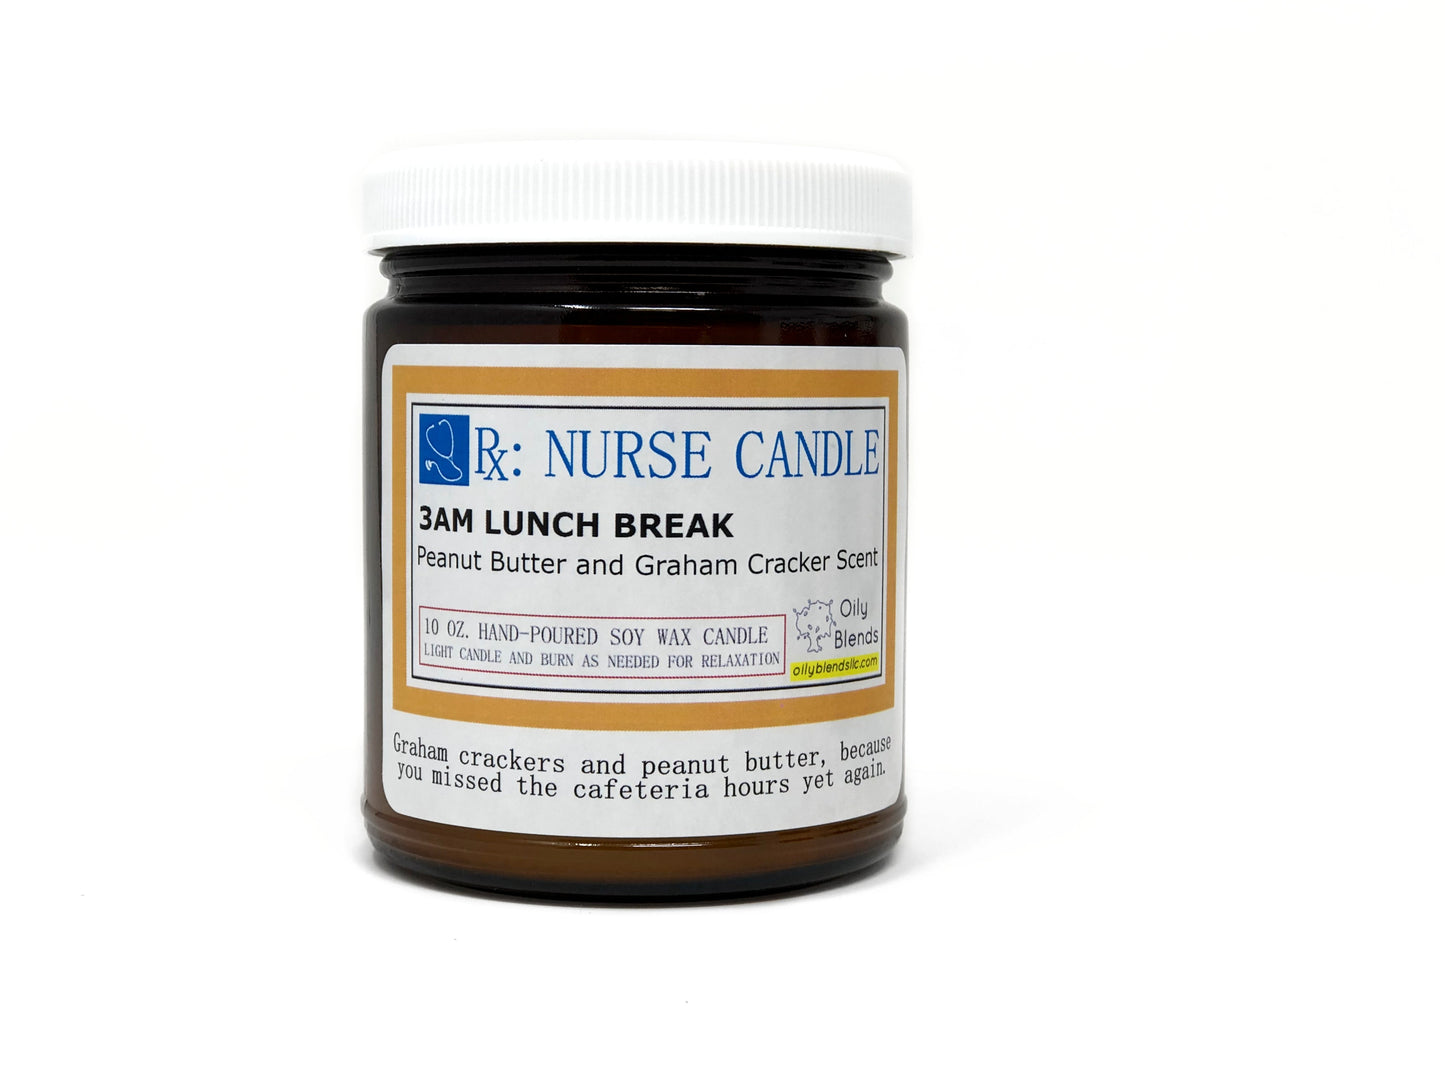 Nurse Candles - 25 Hour Burn Time Soy Wax Candles